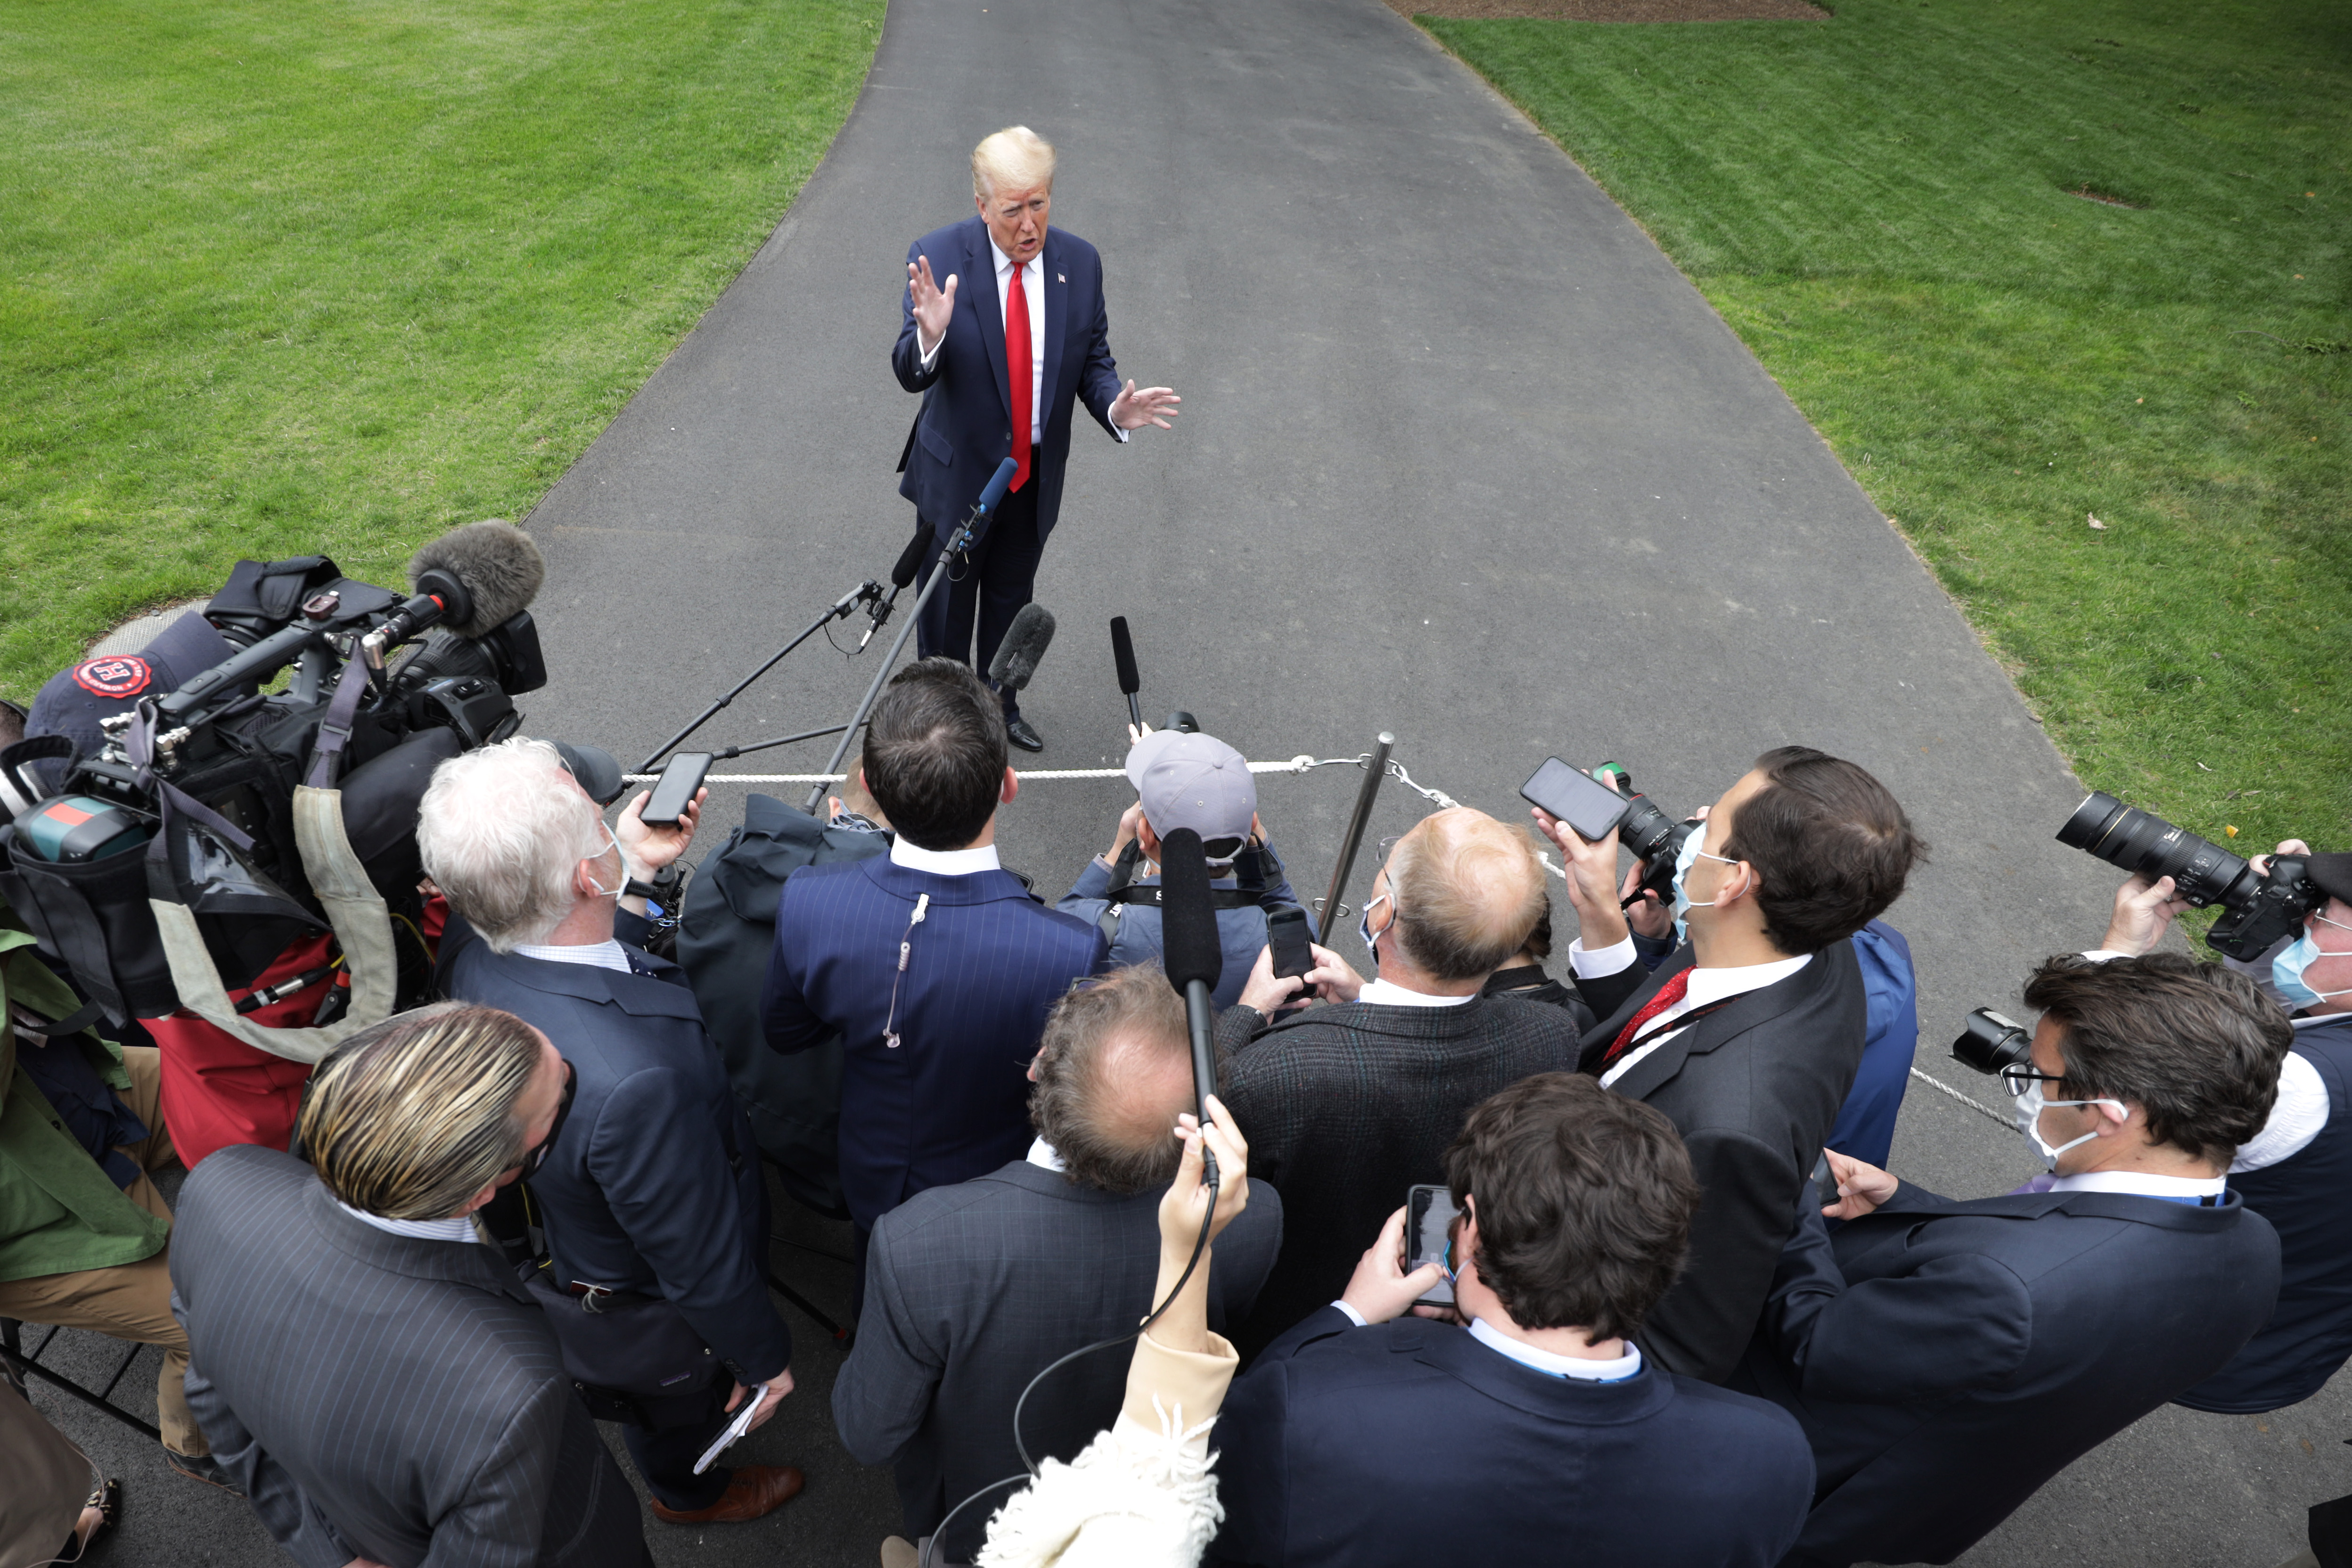 WASHINGTON, DC - MAY 21: U.S. President Donald Trump speaks to the press on the South Lawn of the White House prior to departing on Marine One May 21, 2020 in Washington, DC. President Trump is scheduled to visit a Ford manufacturing plant that is currently producing ventilators in Michigan. (Photo by Alex Wong/Getty Images)